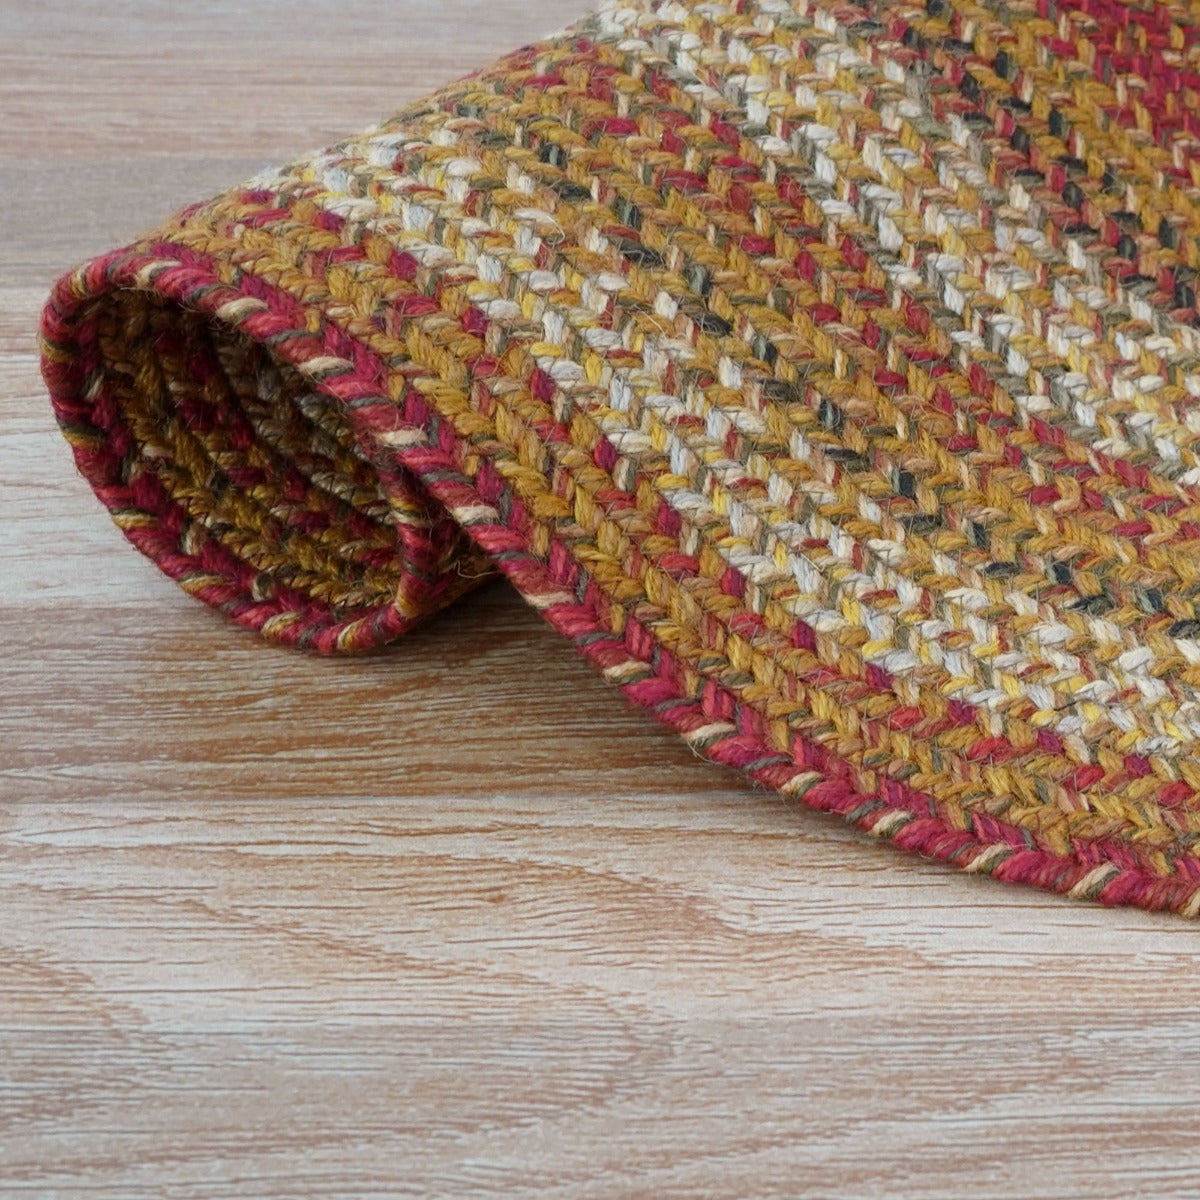 Mustard Seed Red - Green Jute Braided Oval Rugs